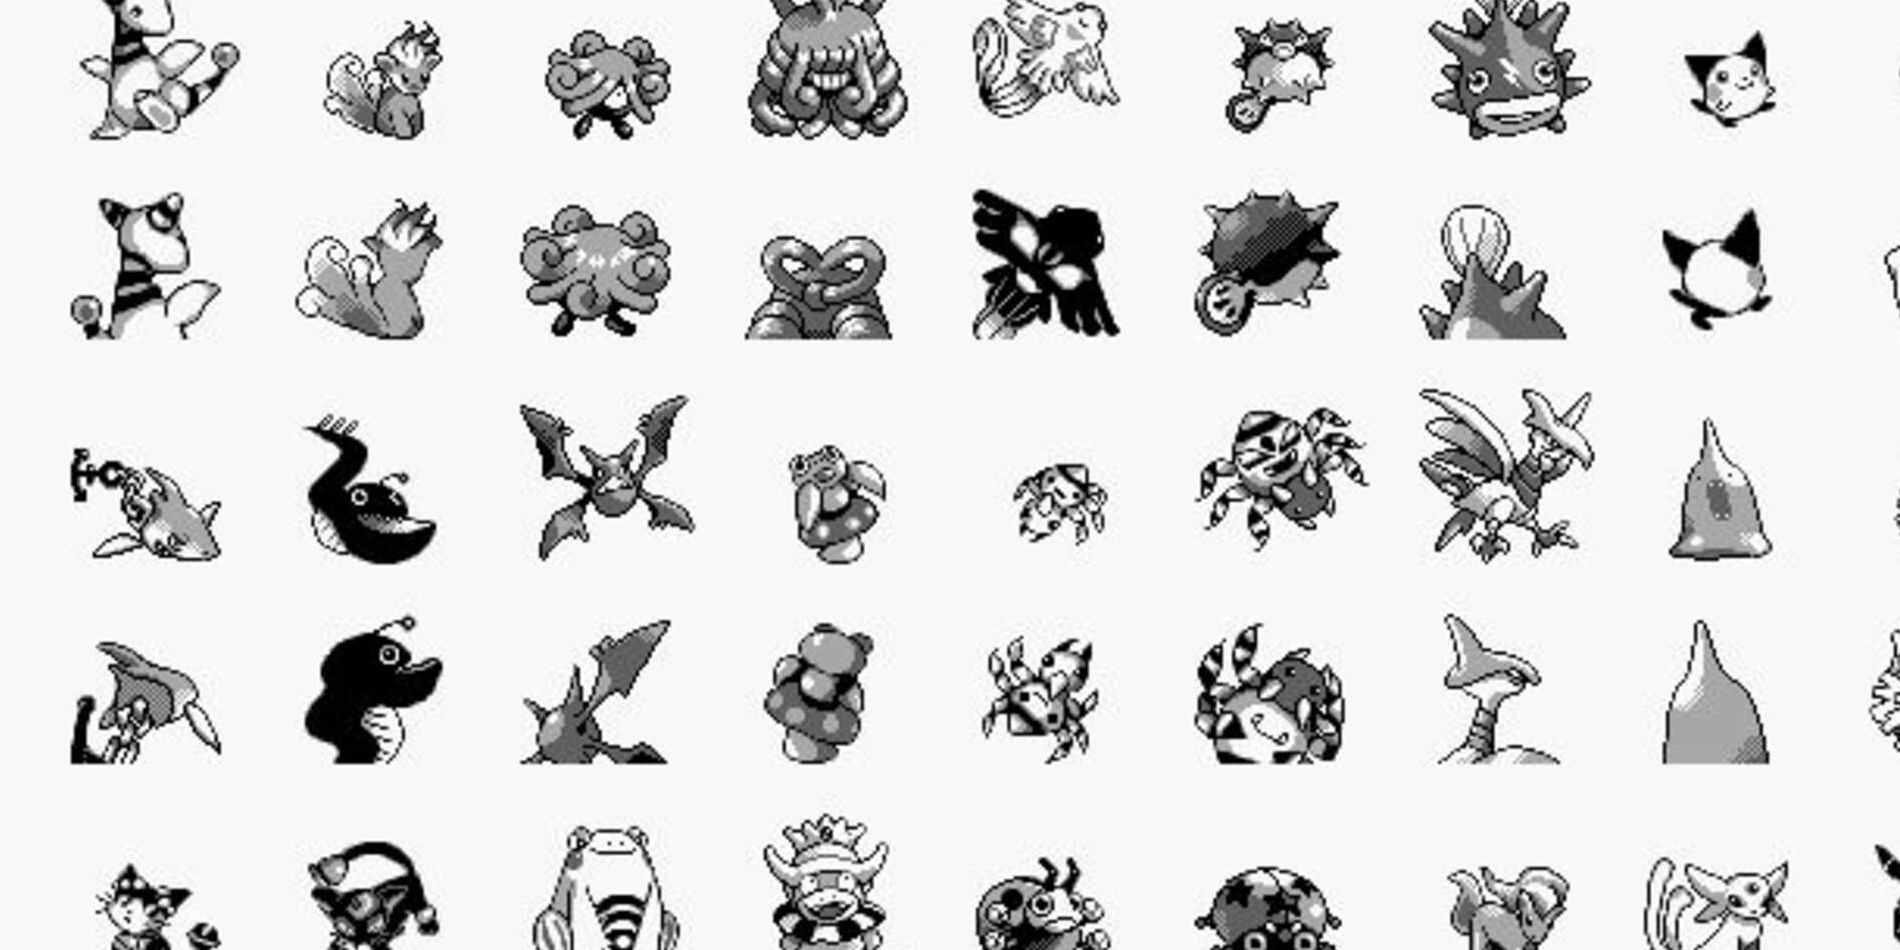 Unused Pokémon Designs That Could Appear In Future Games